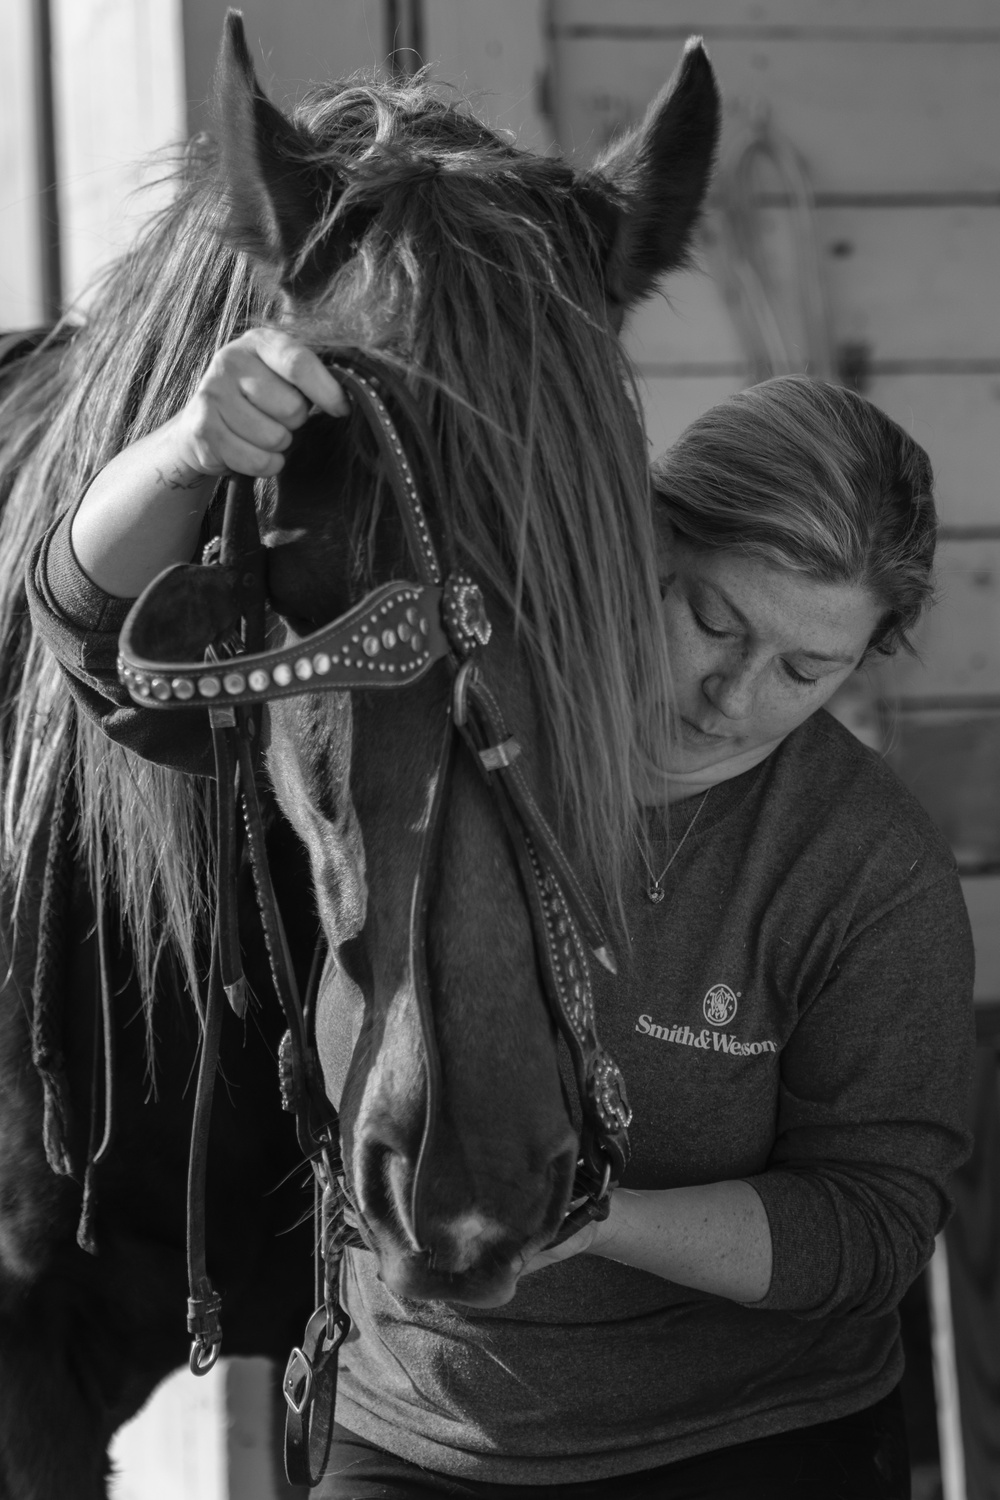 Four hearts, one soul: Family builds bond through love for horses